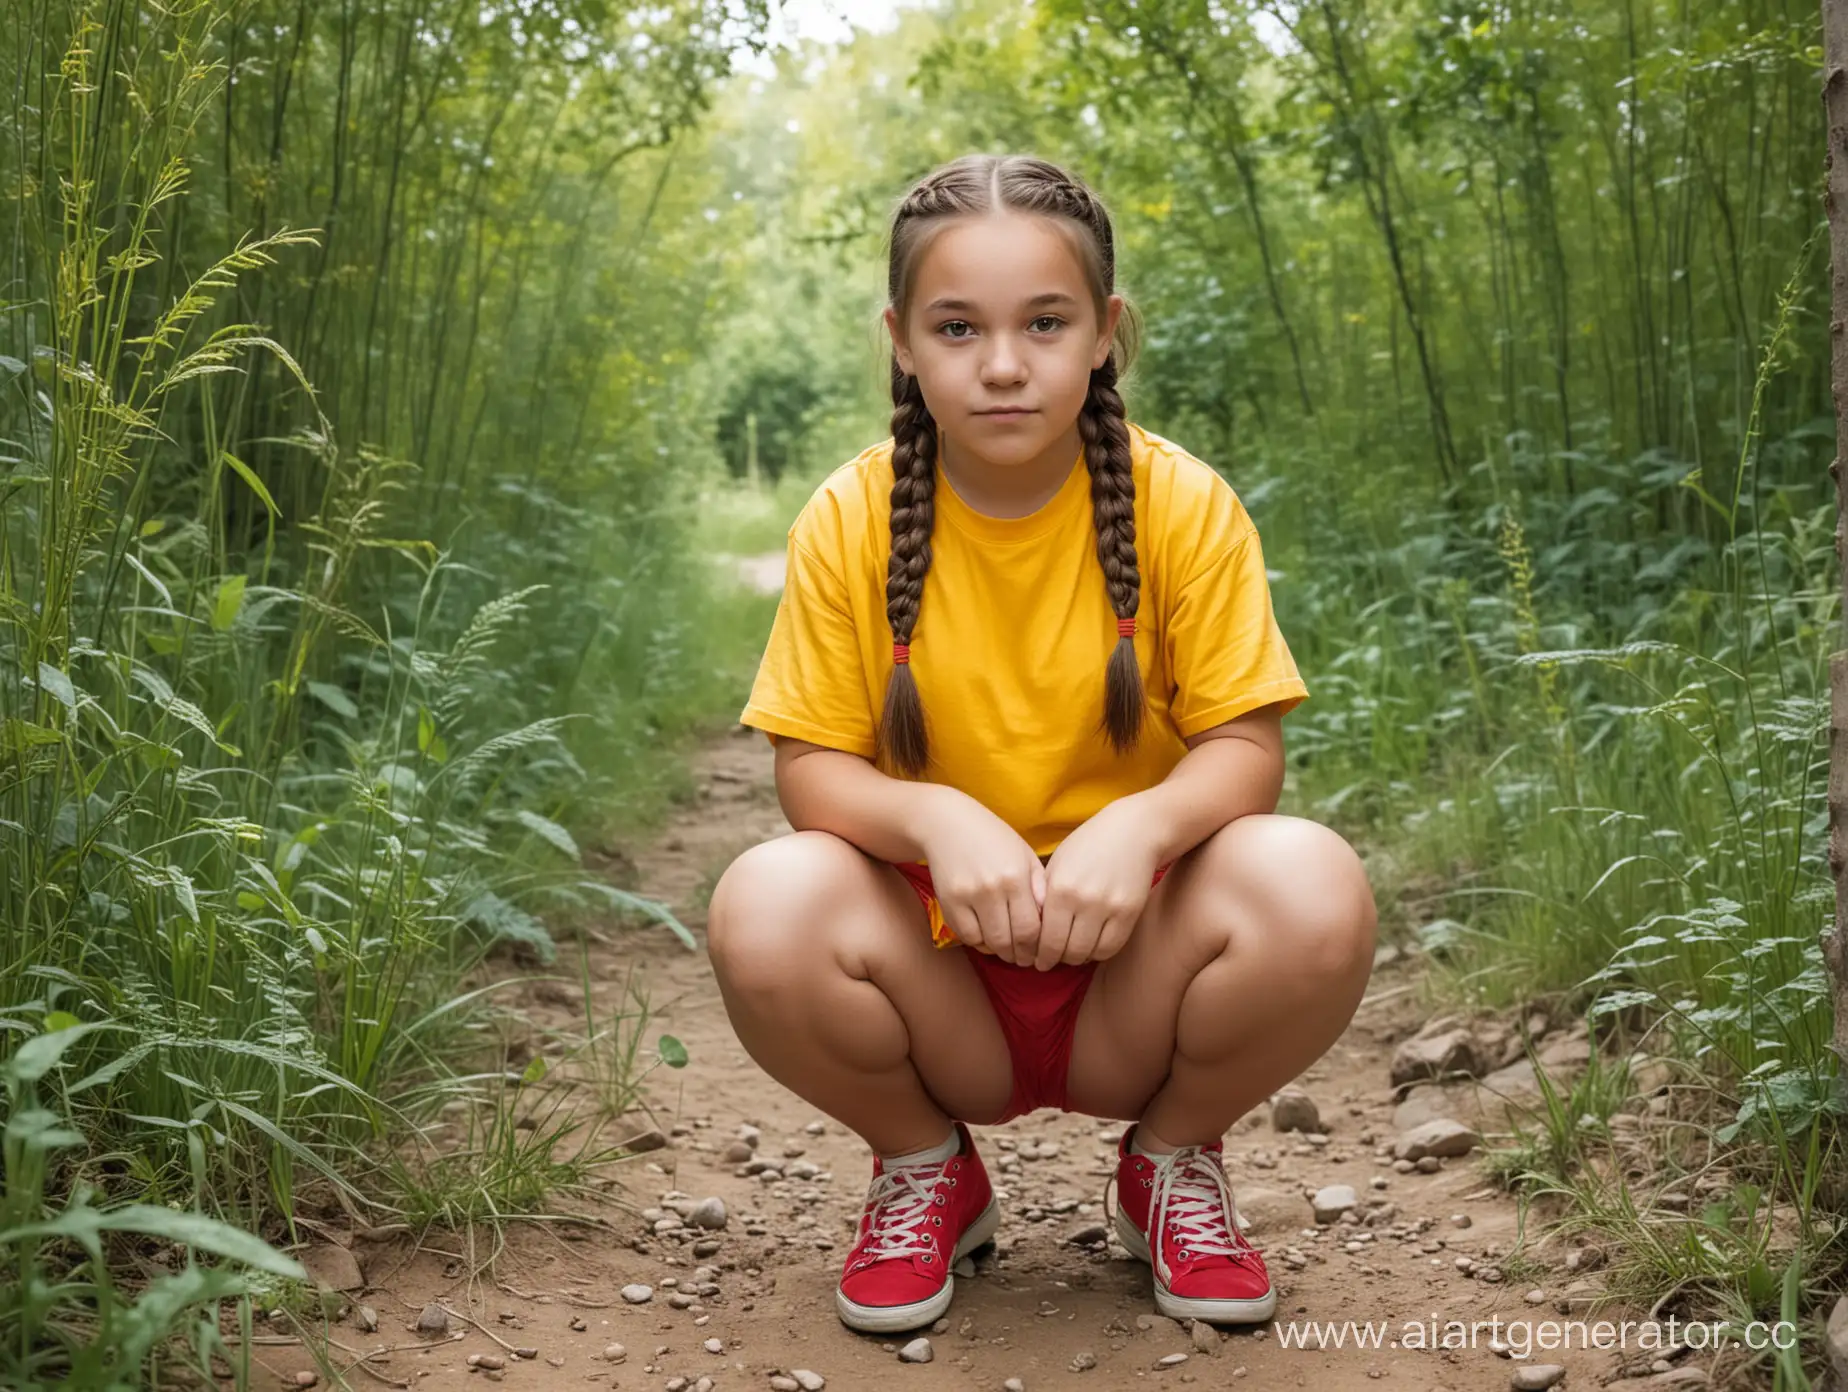 Adorable-12YearOld-Girl-with-Braids-Squatting-in-Nature